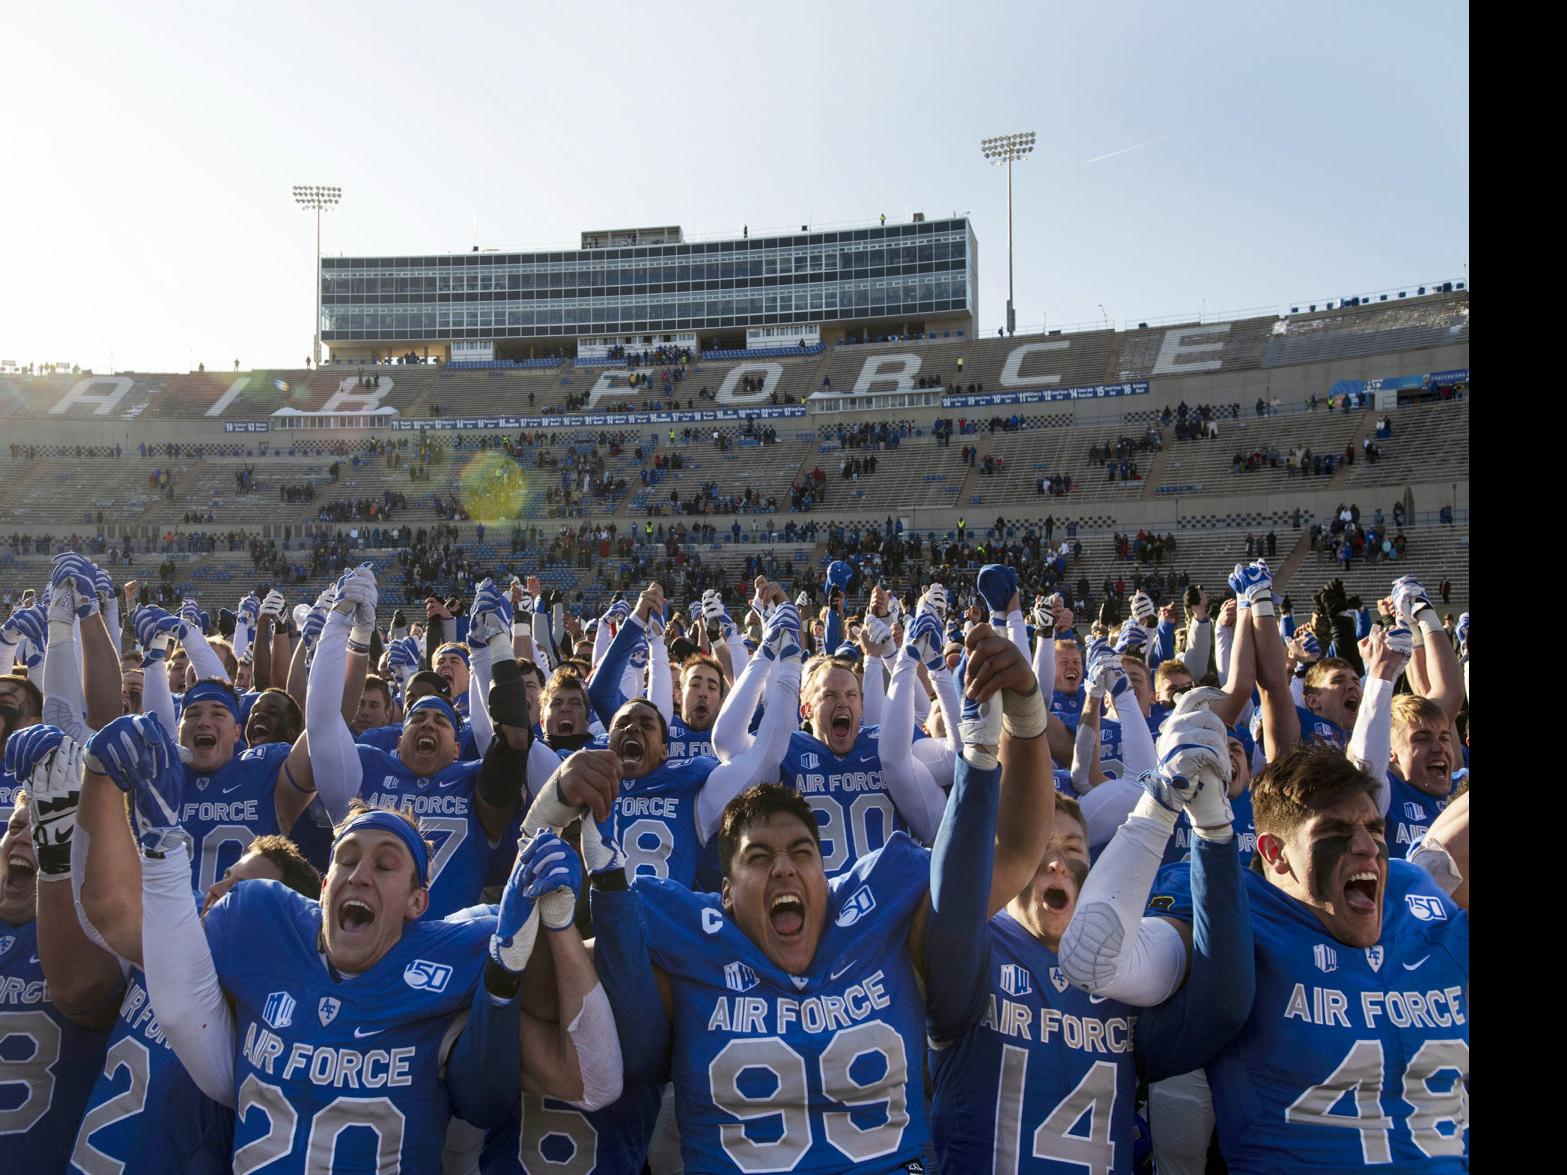 Air Force football could be hosting Big 12 opponent at Falcon Stadium, Sports